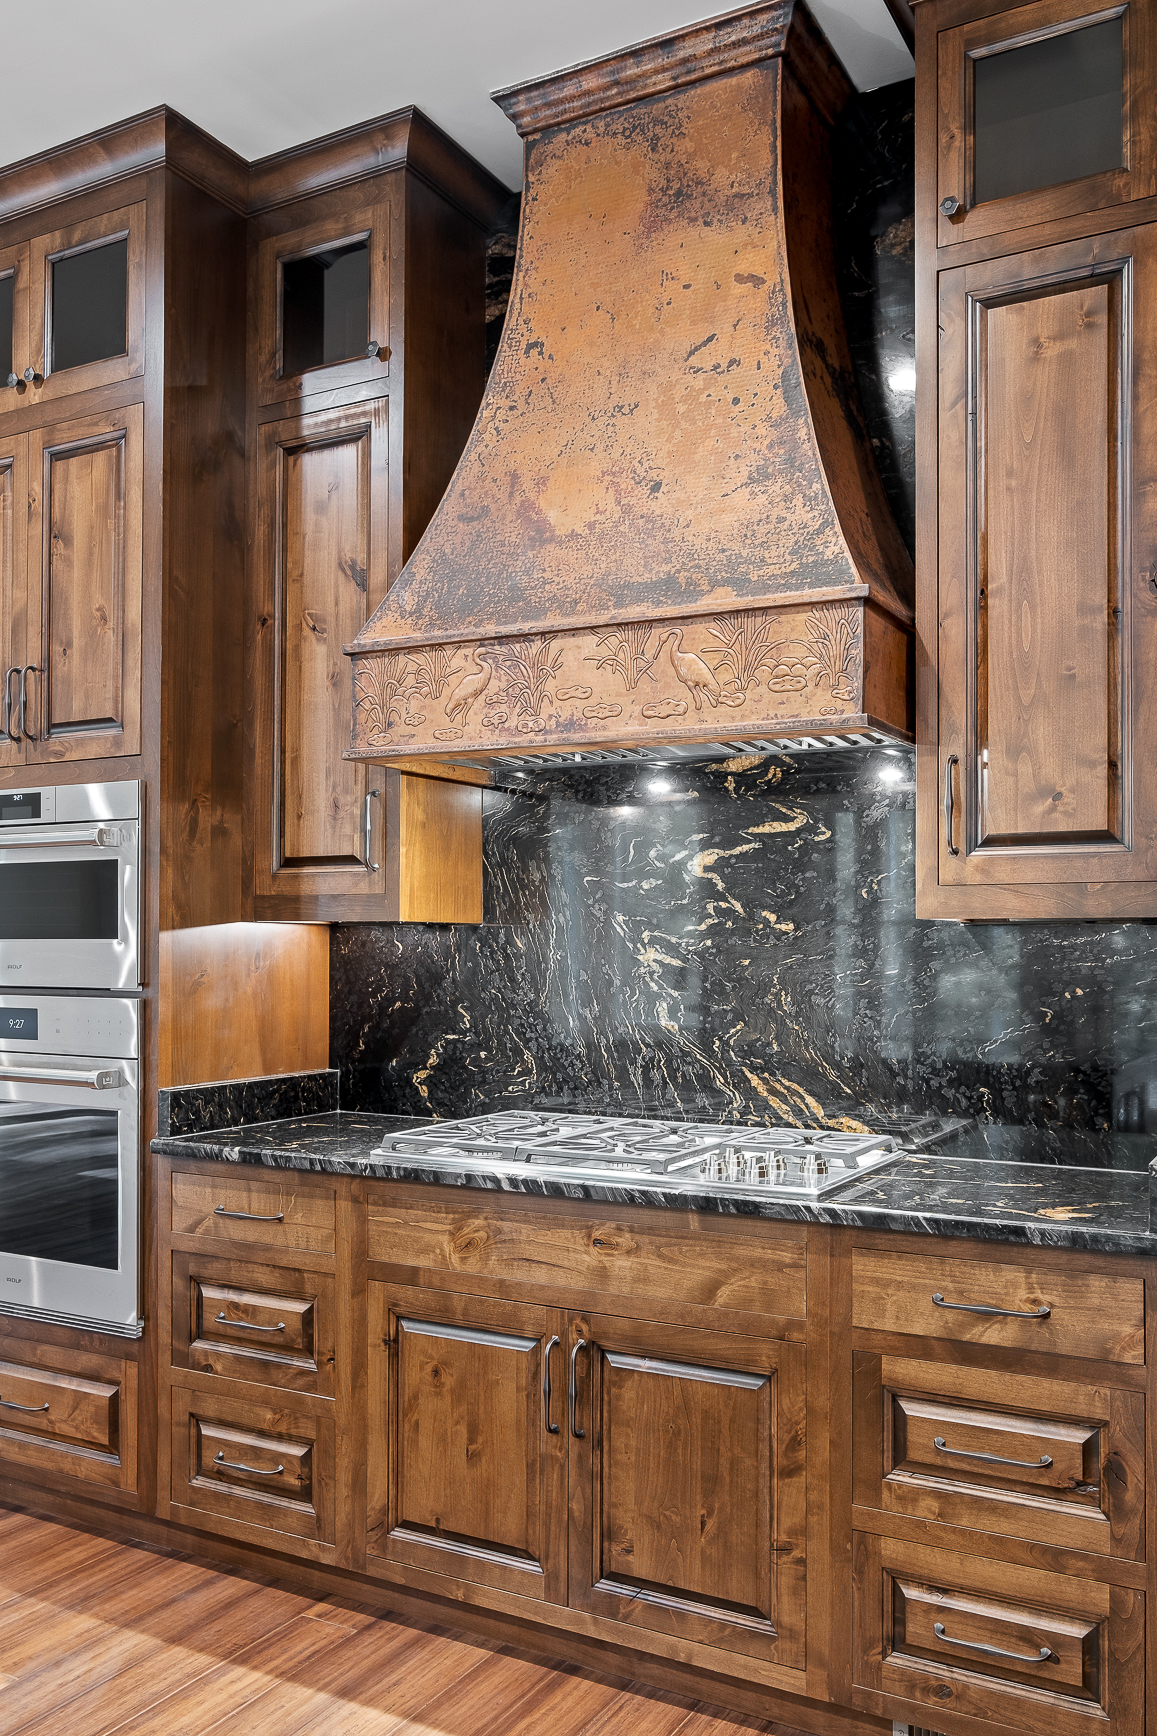 Black kitchen countertop with wood cabinets and copper range hood